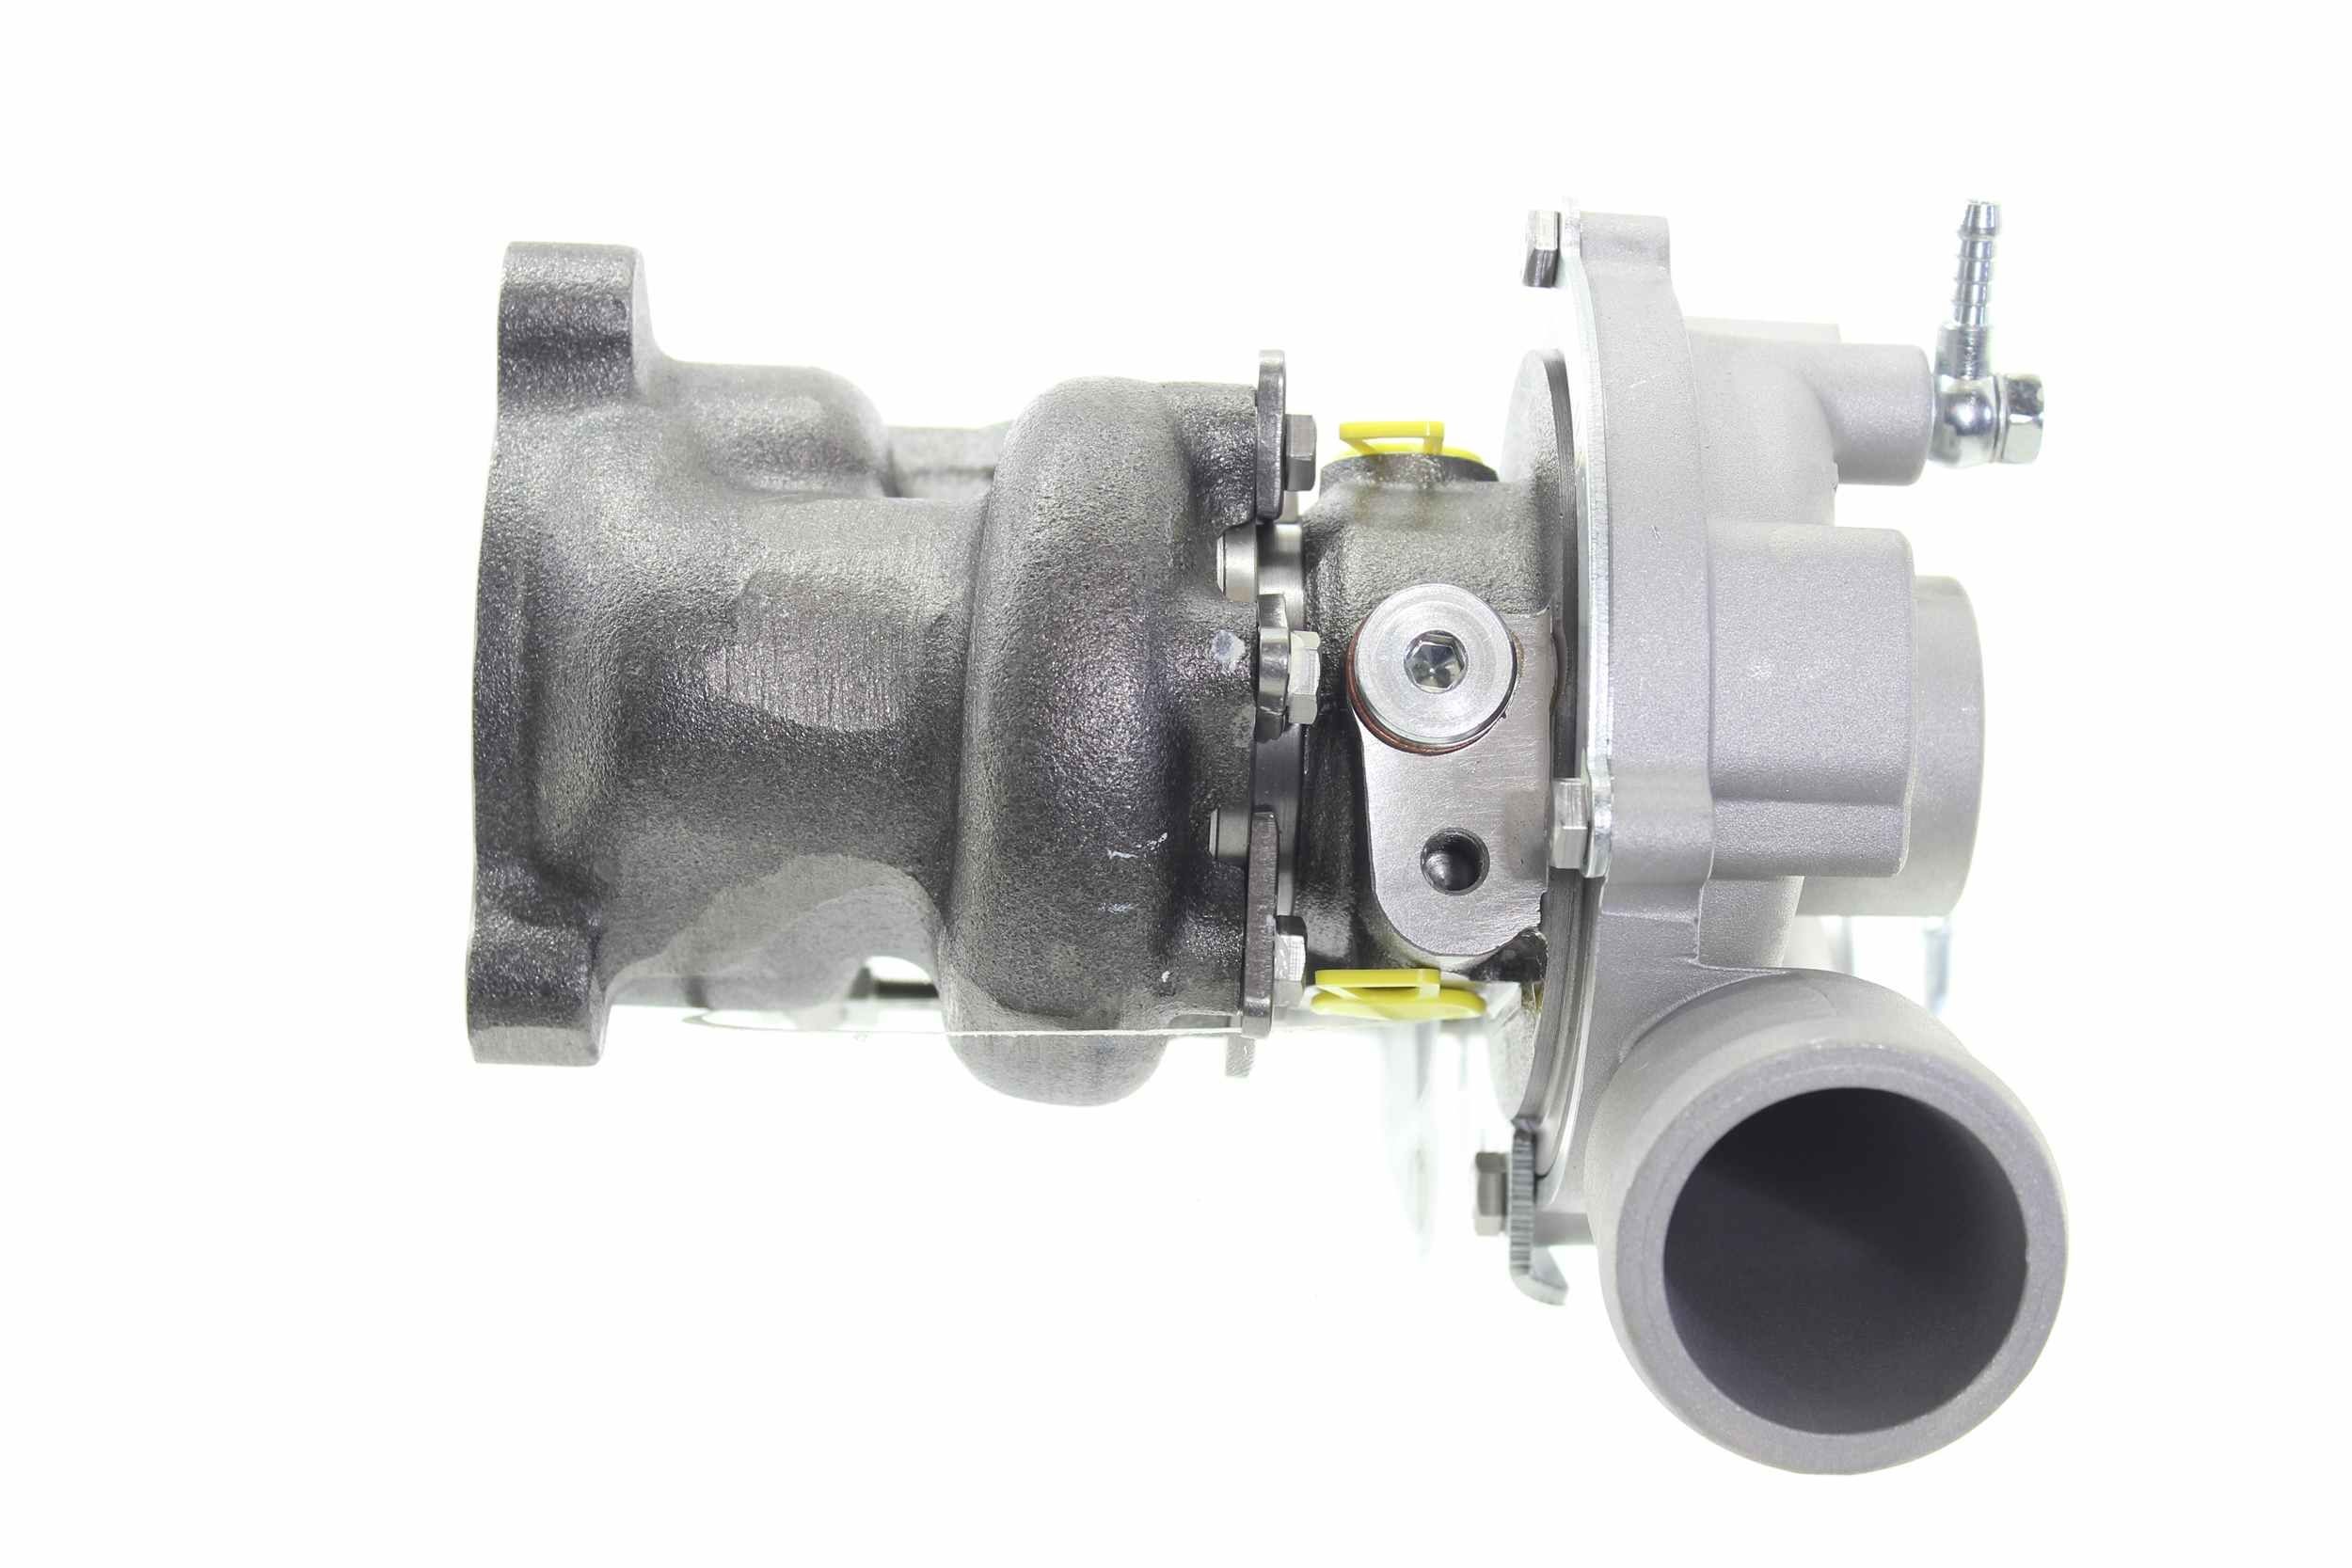 10900092 Turbocharger 900092 ALANKO Exhaust Turbocharger, Incl. Gasket Set, with attachment material